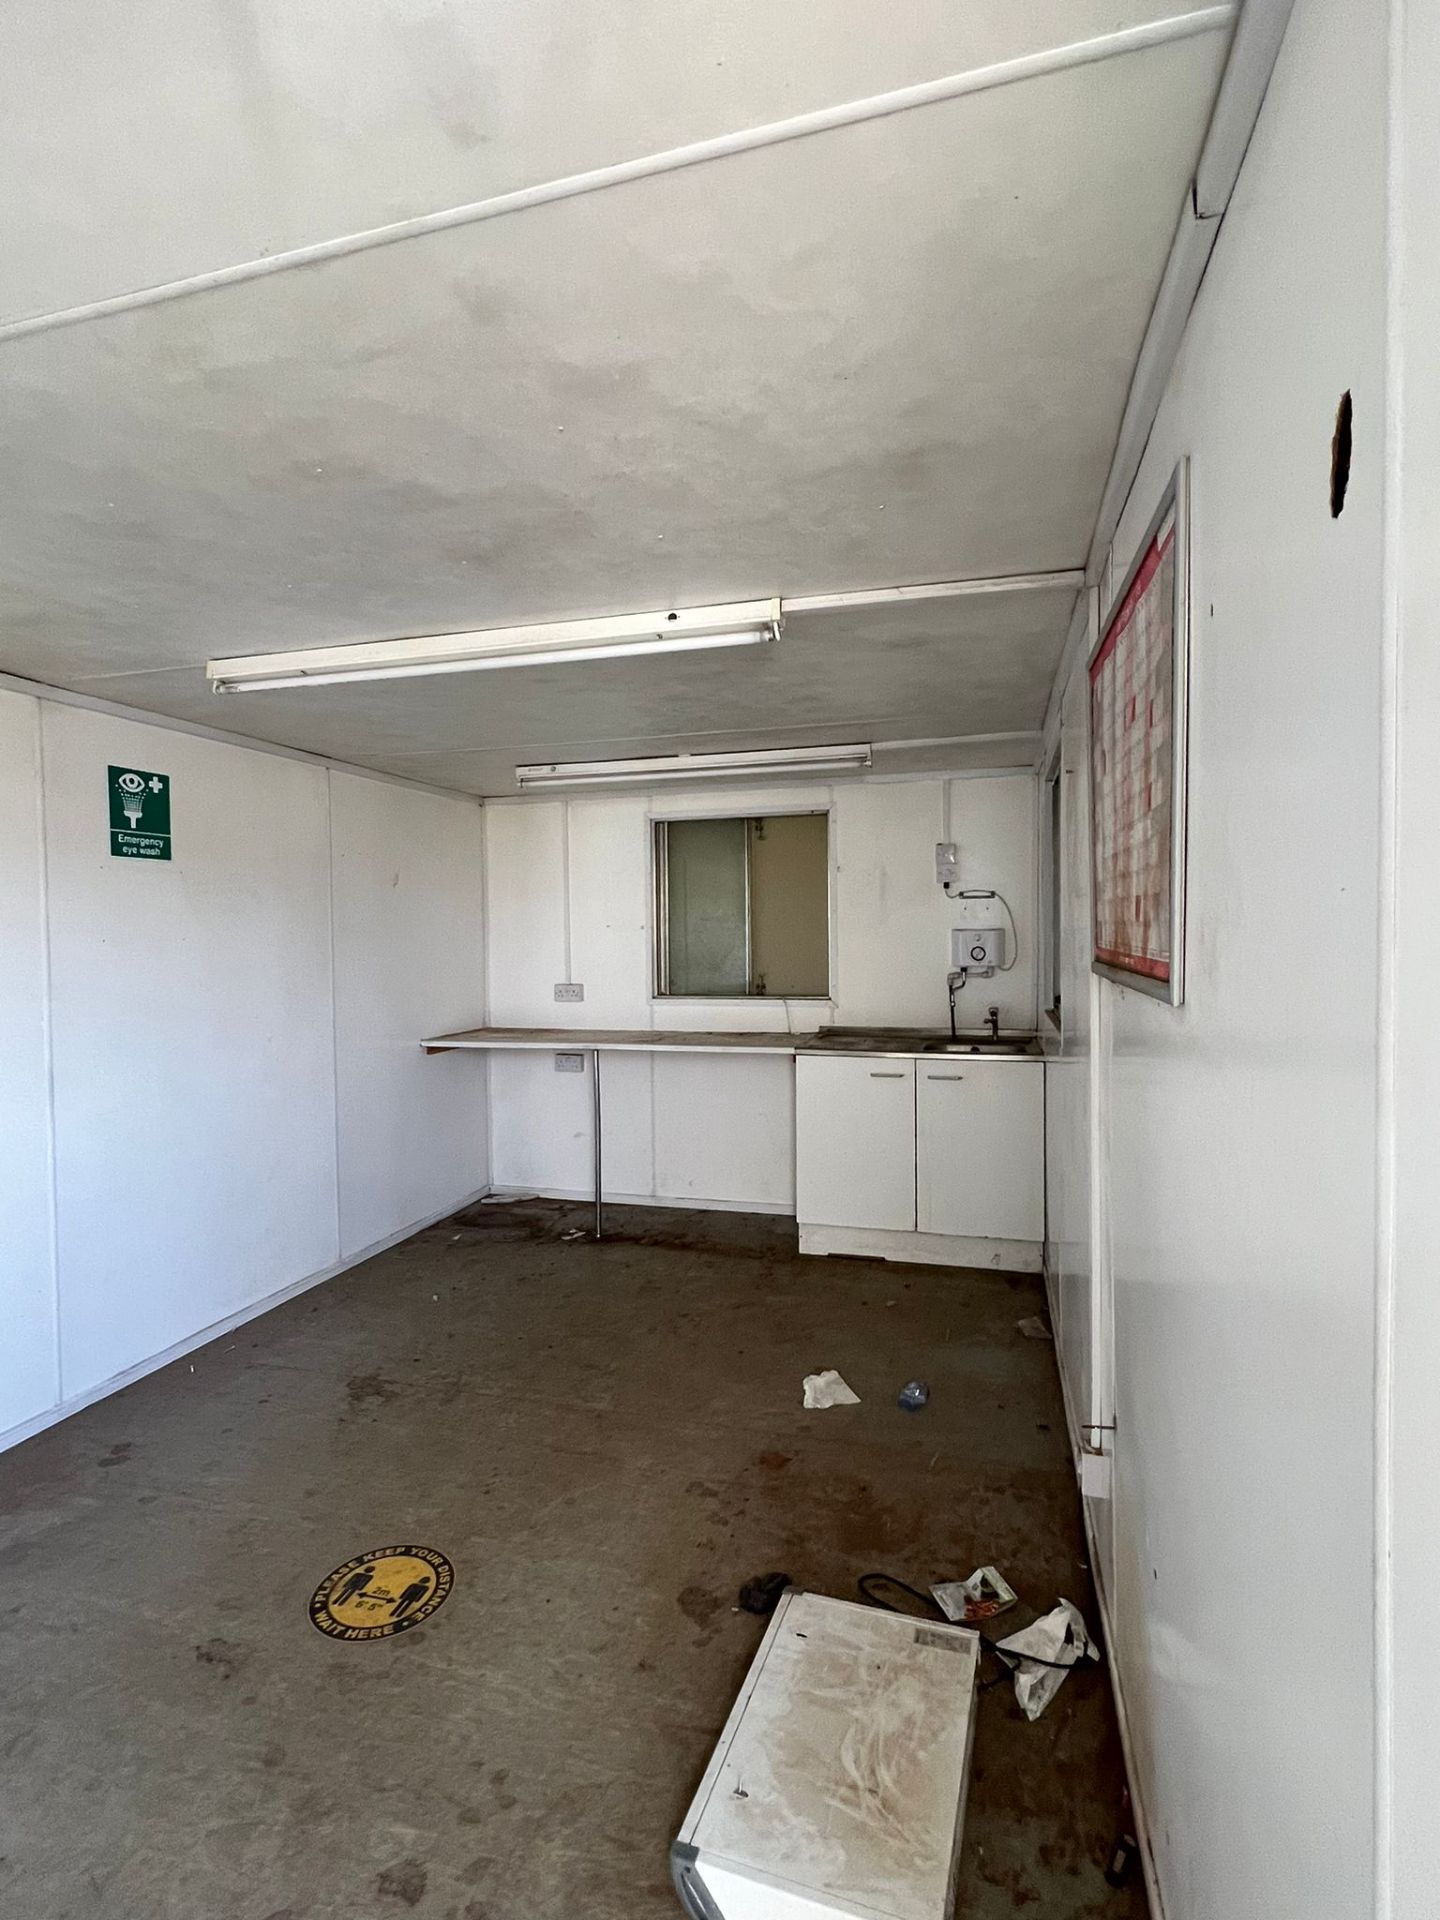 32ft anti vandal site office welfare unit canteen - Image 5 of 5